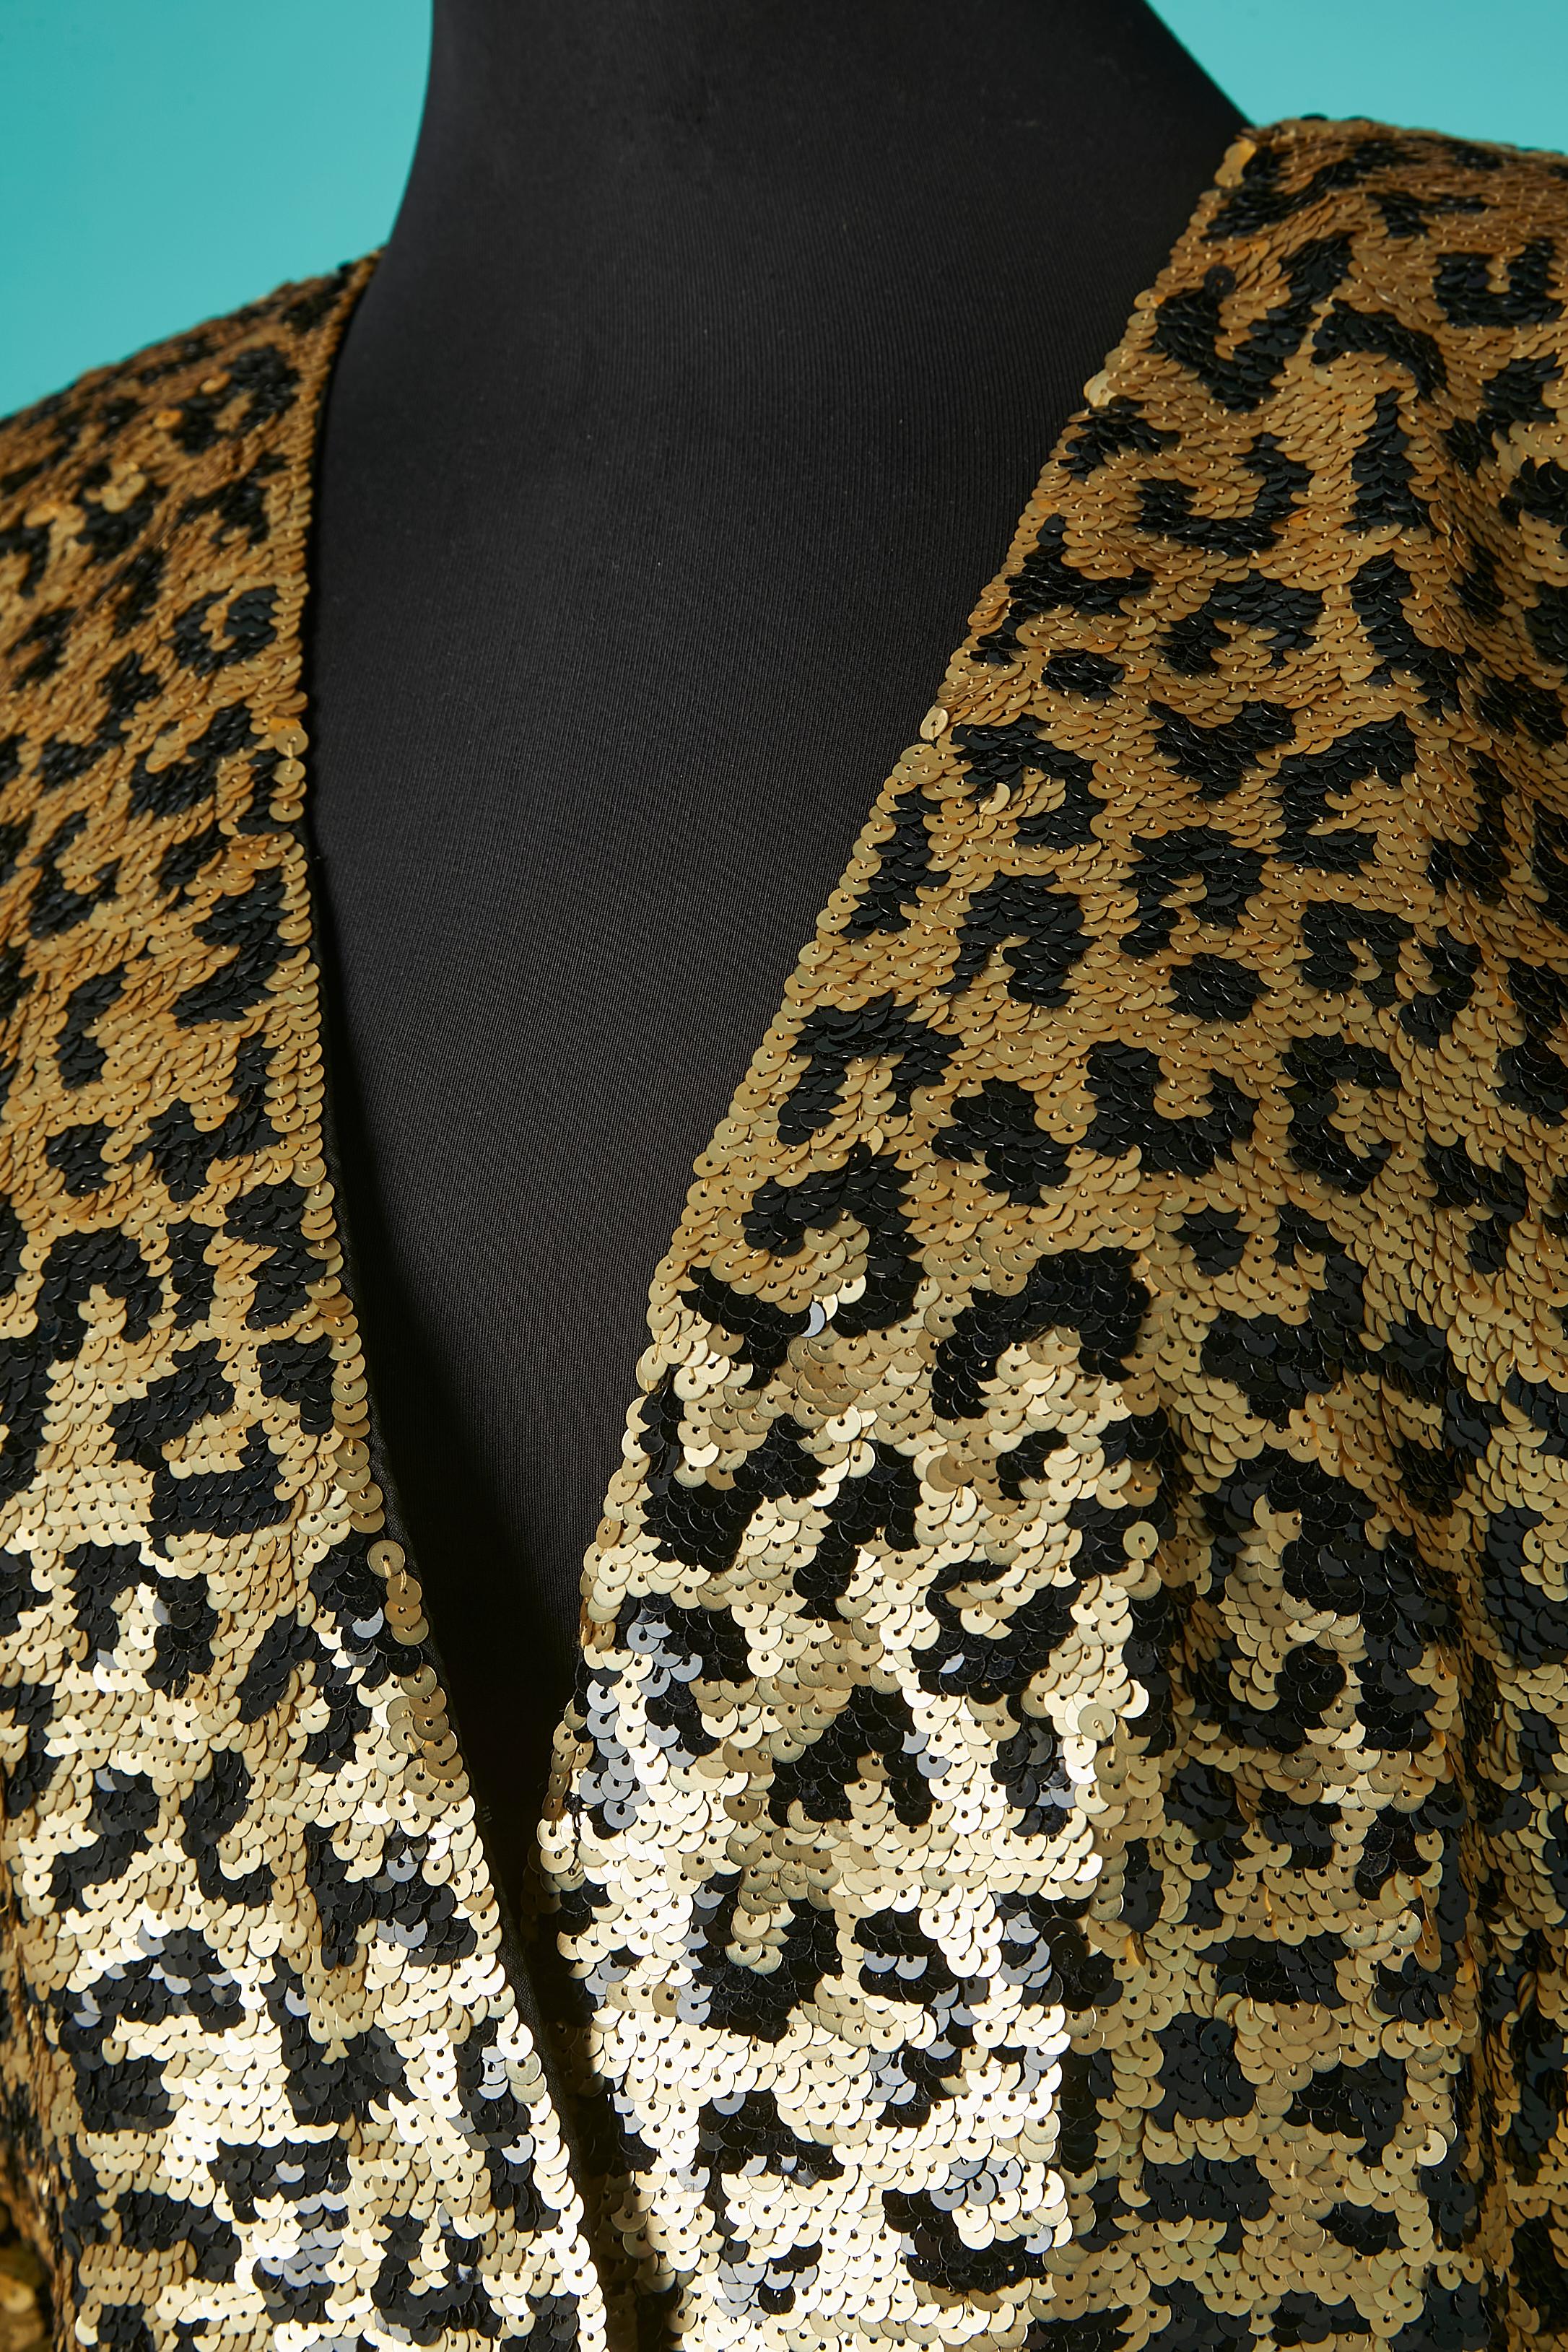 Black and gold sequin evening jacket with animal pattern Black Tie Oleg Cassini  In Excellent Condition For Sale In Saint-Ouen-Sur-Seine, FR